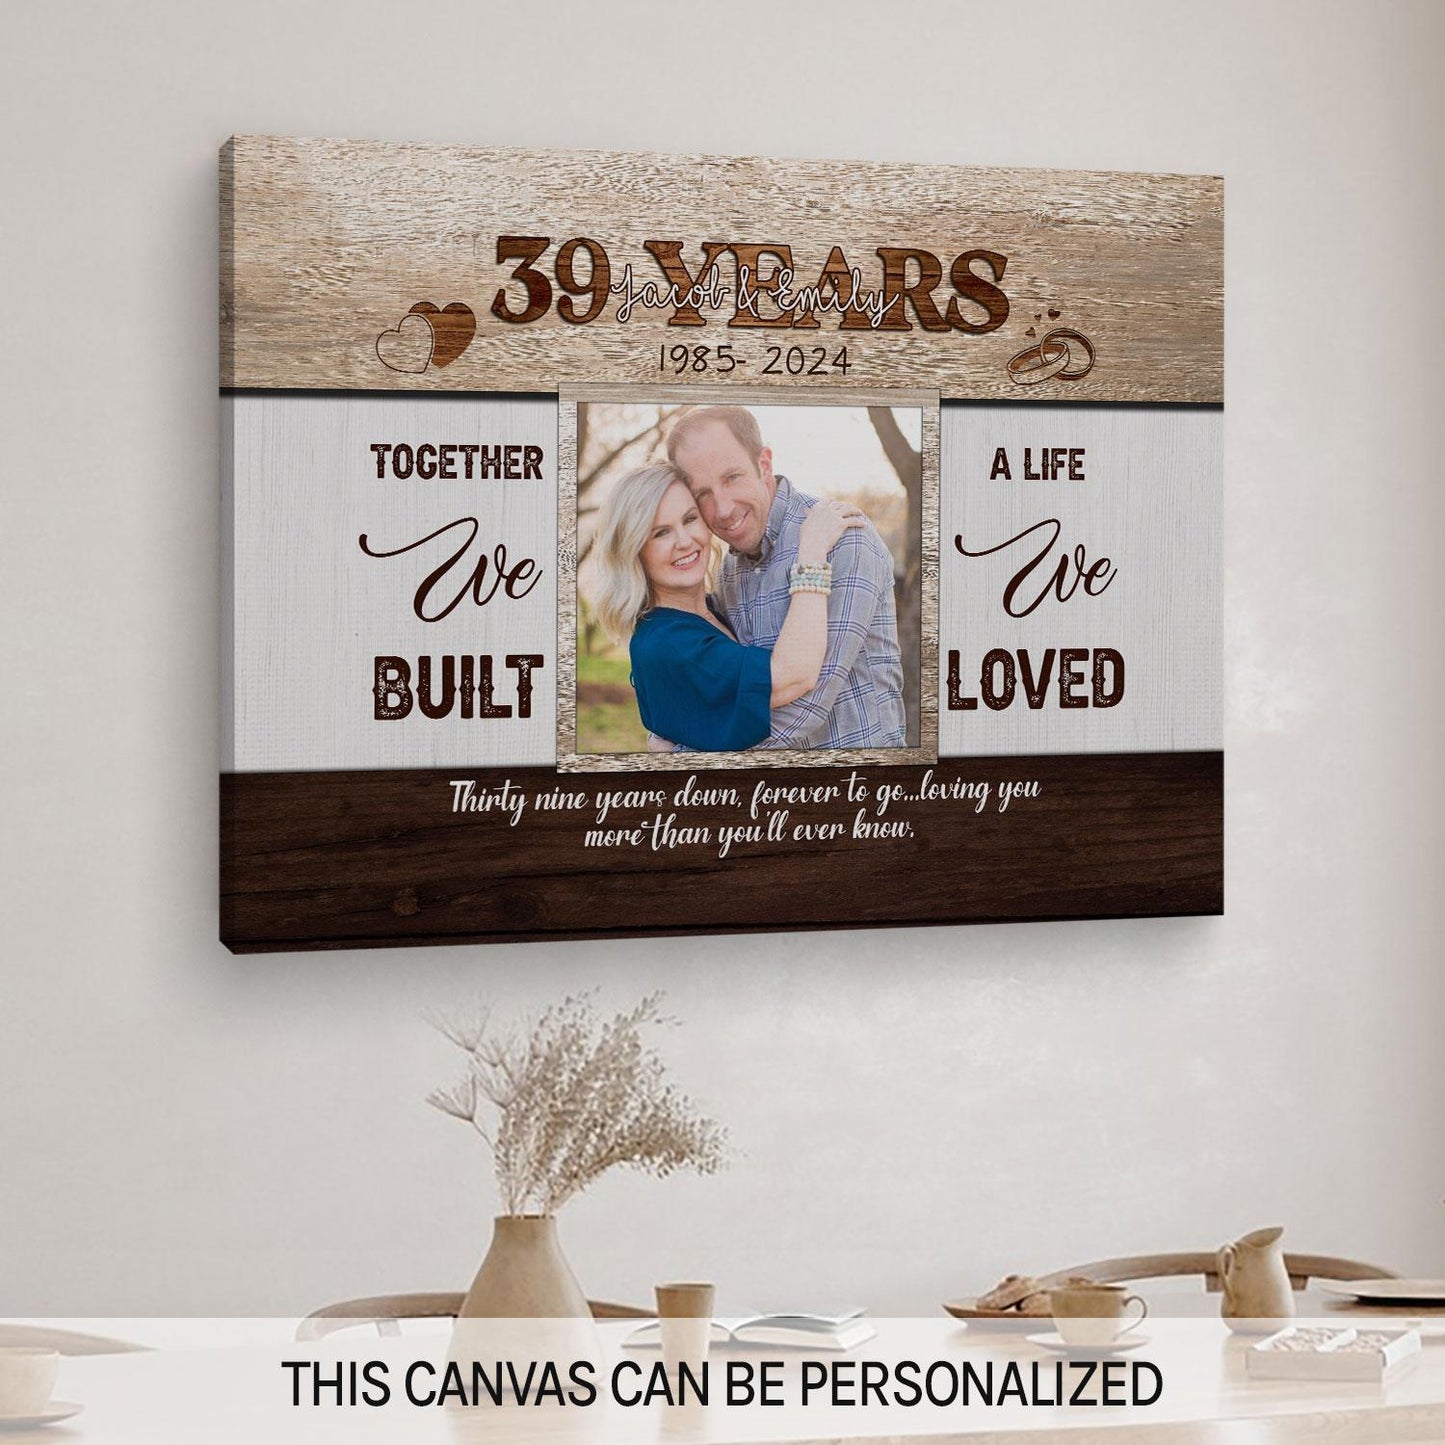 Thirty Nine Years Forever To Go - Personalized 39 Year Anniversary gift For Husband or Wife - Custom Canvas Print - MyMindfulGifts